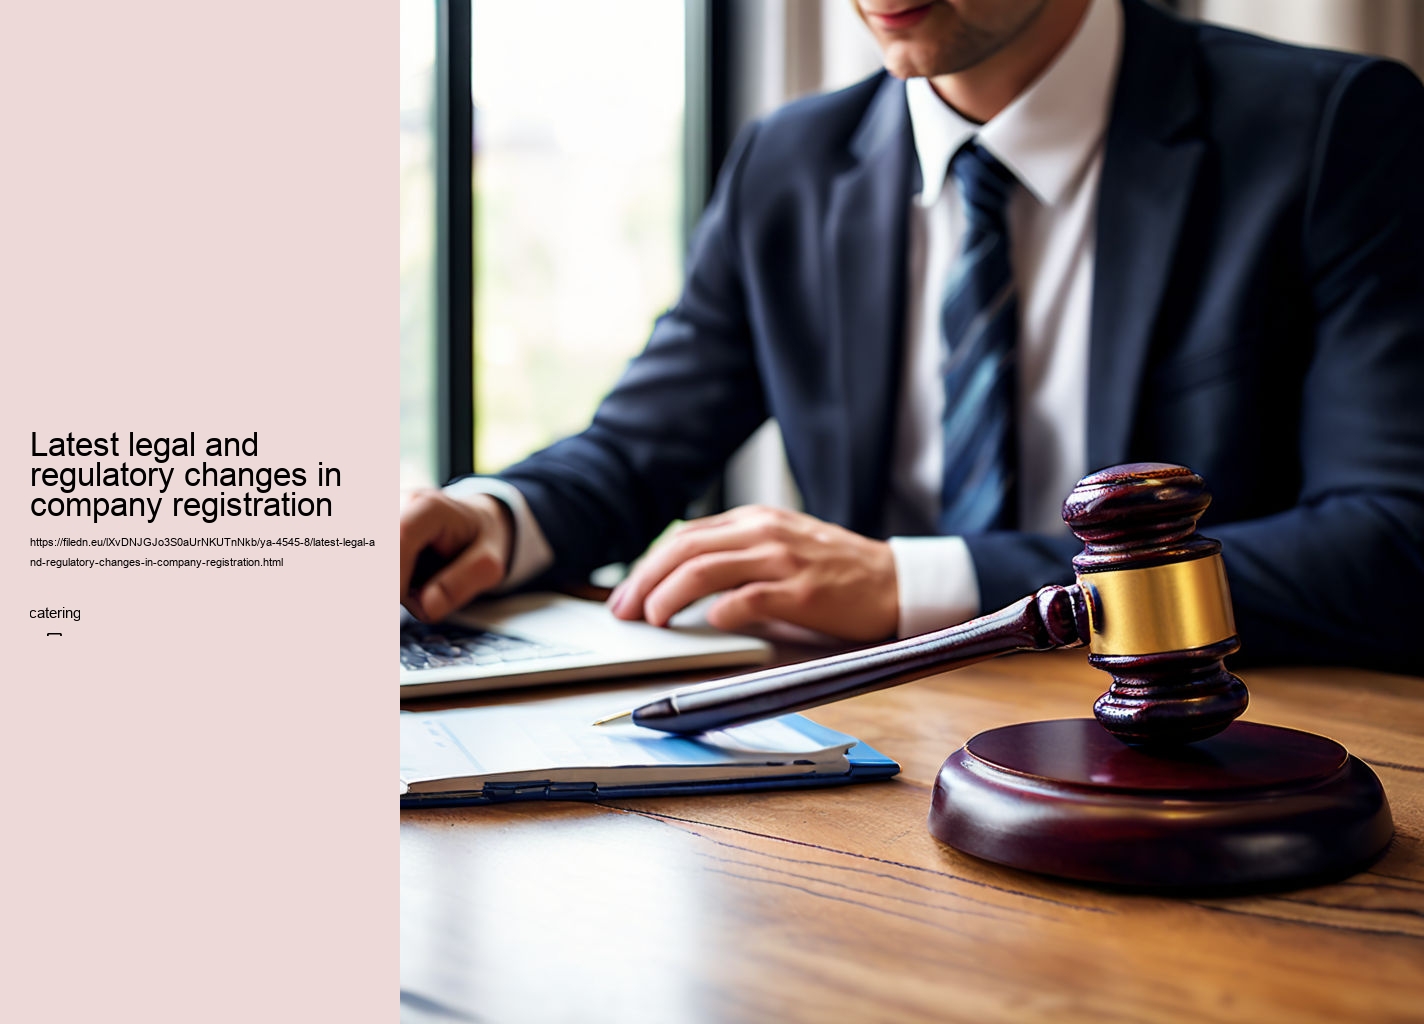 Latest legal and regulatory changes in company registration